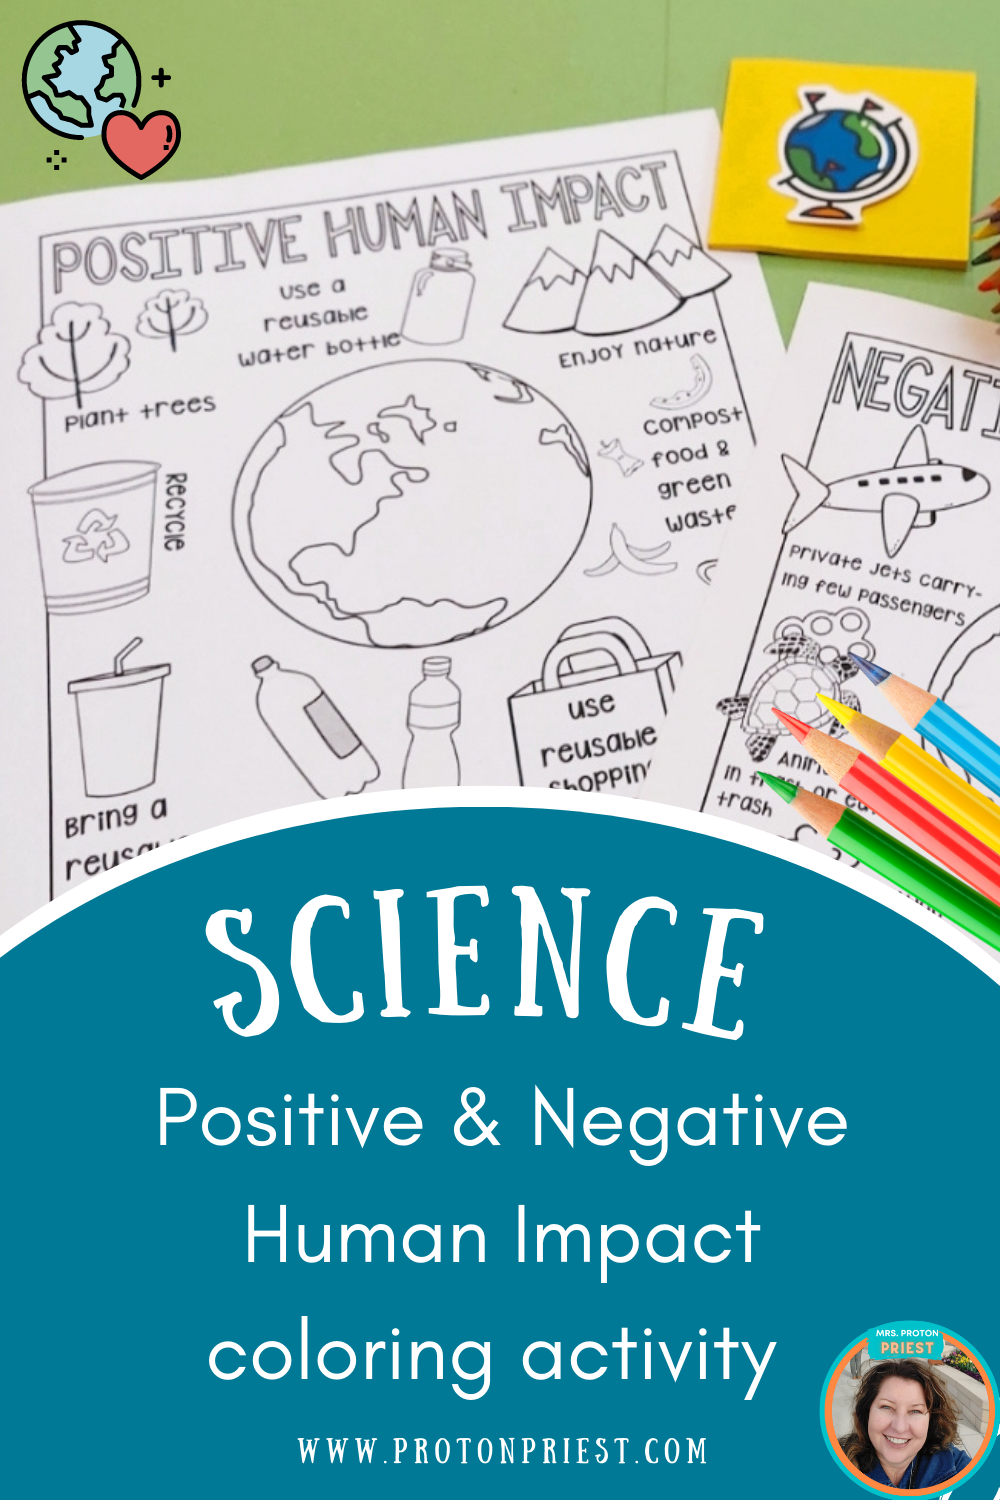 Positive and negative human impact on the environment coloring activities for elementary and middle school students.